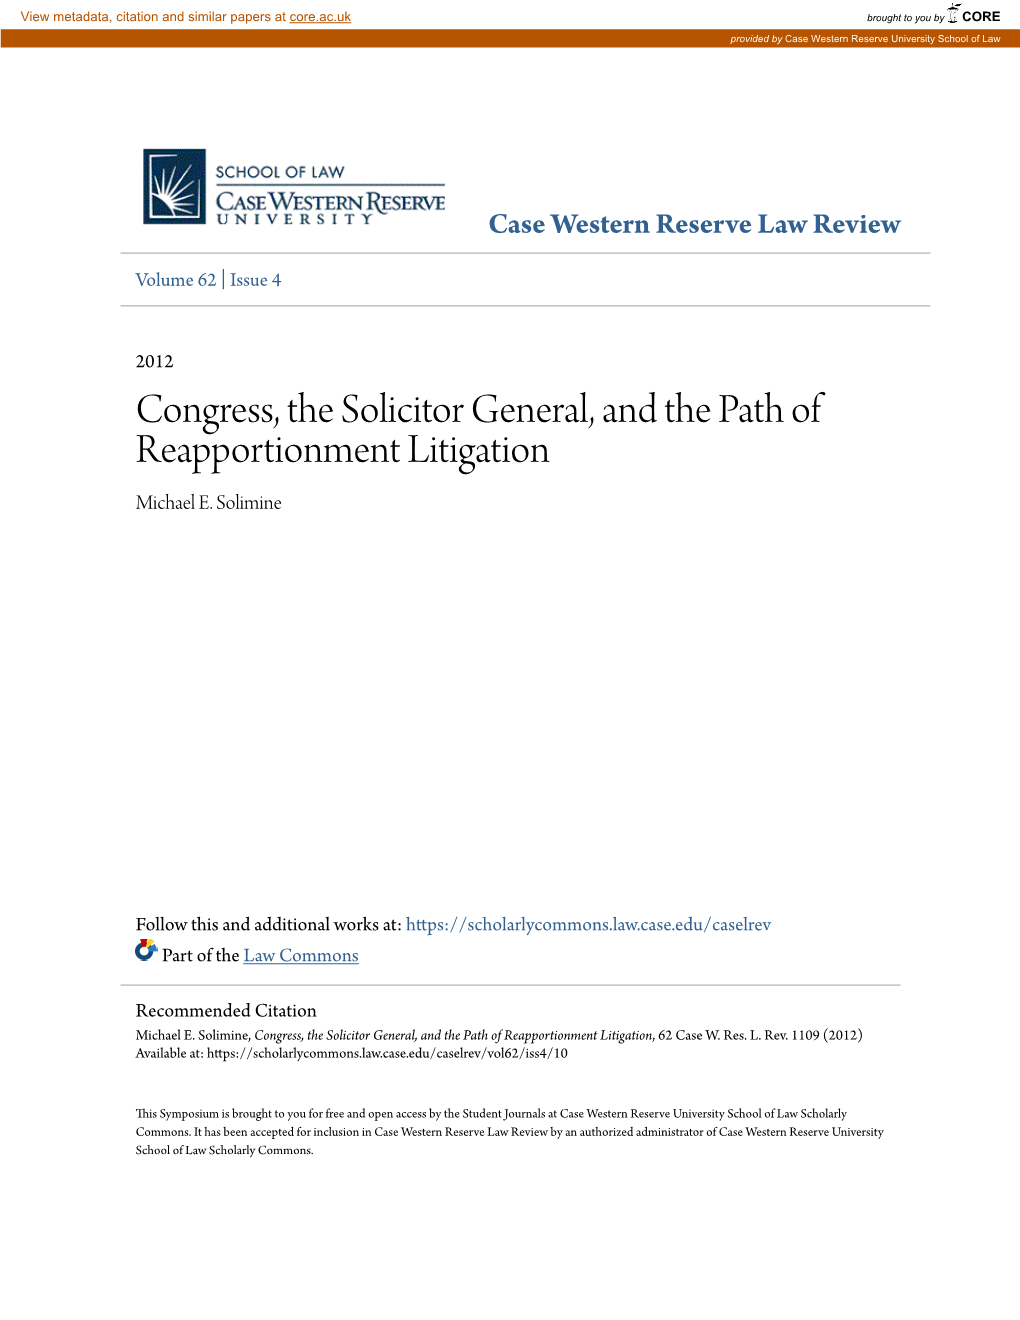 Congress, the Solicitor General, and the Path of Reapportionment Litigation Michael E